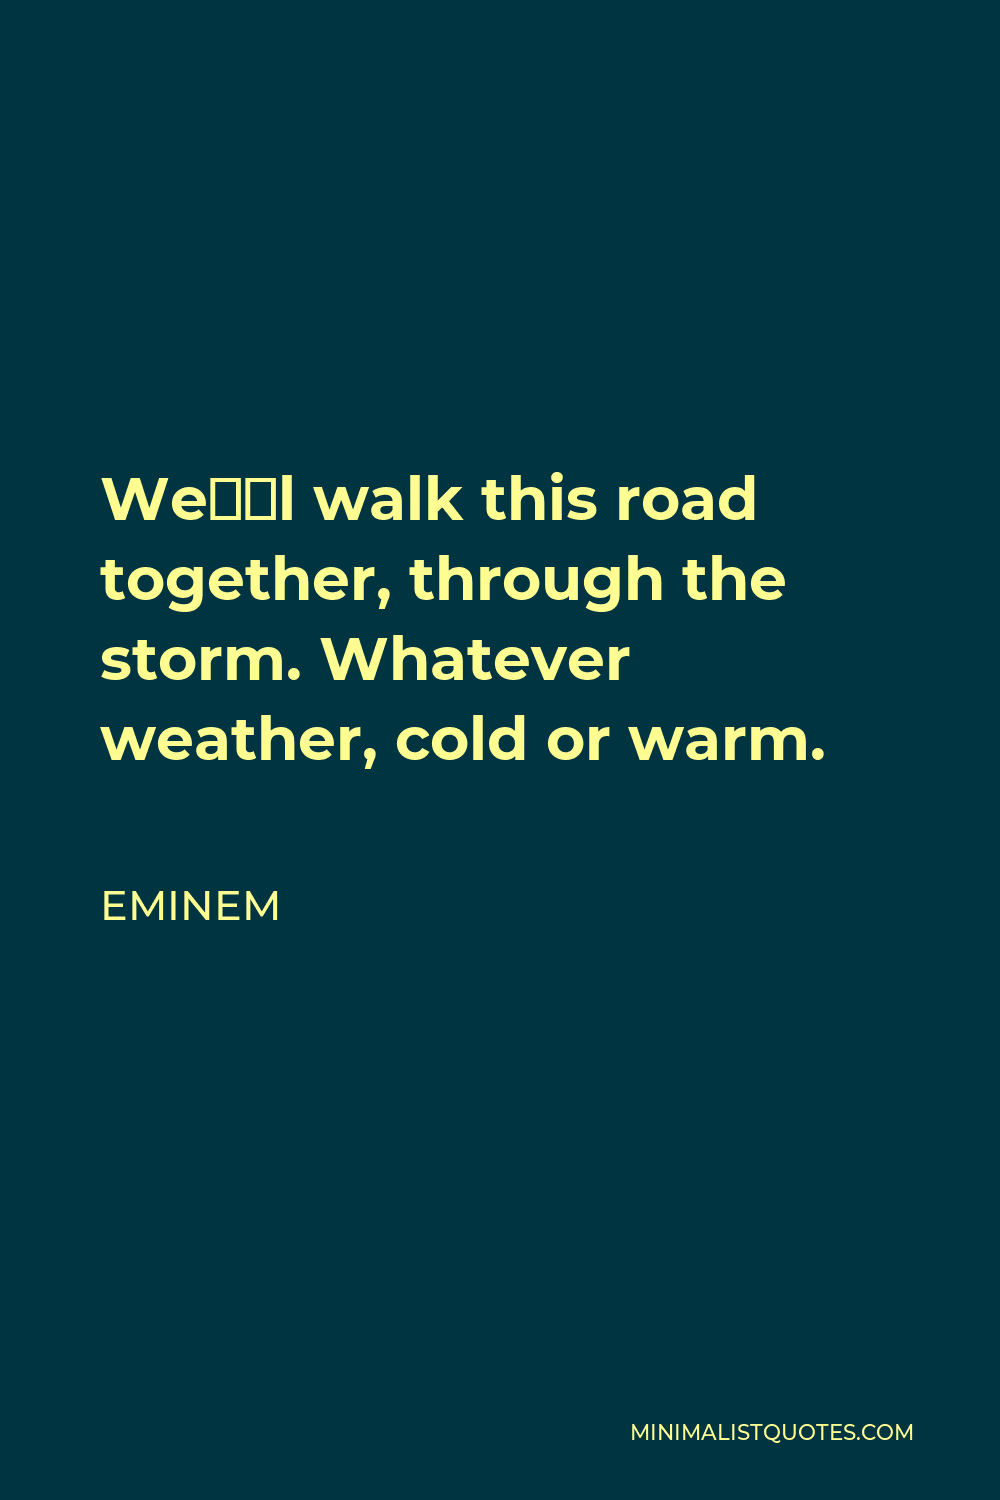 Eminem Quote - We’ll walk this road together, through the storm. Whatever weather, cold or warm.